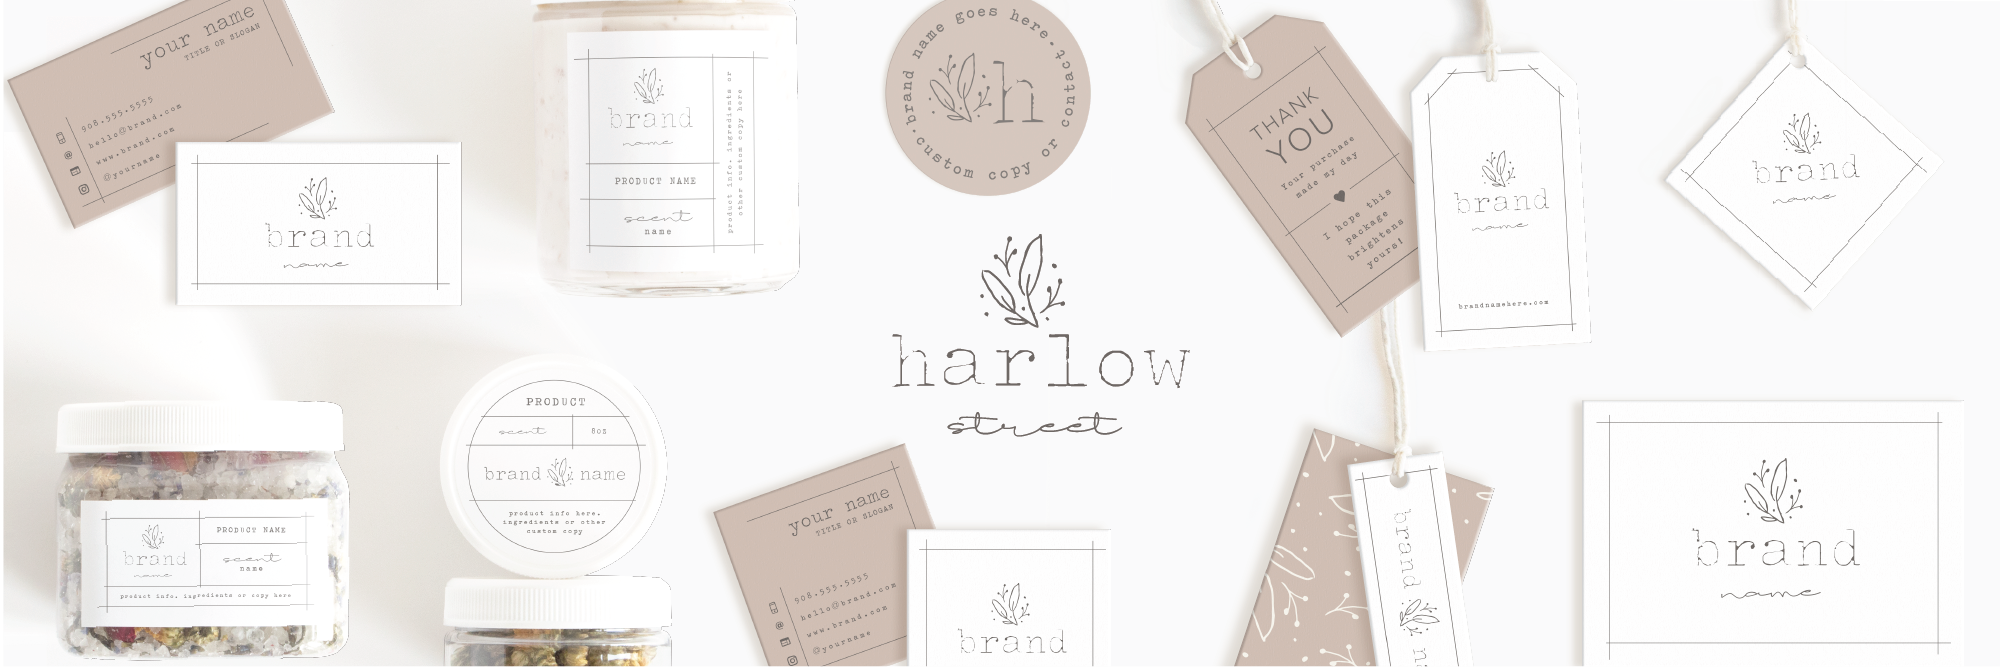 Harlow Street Collection